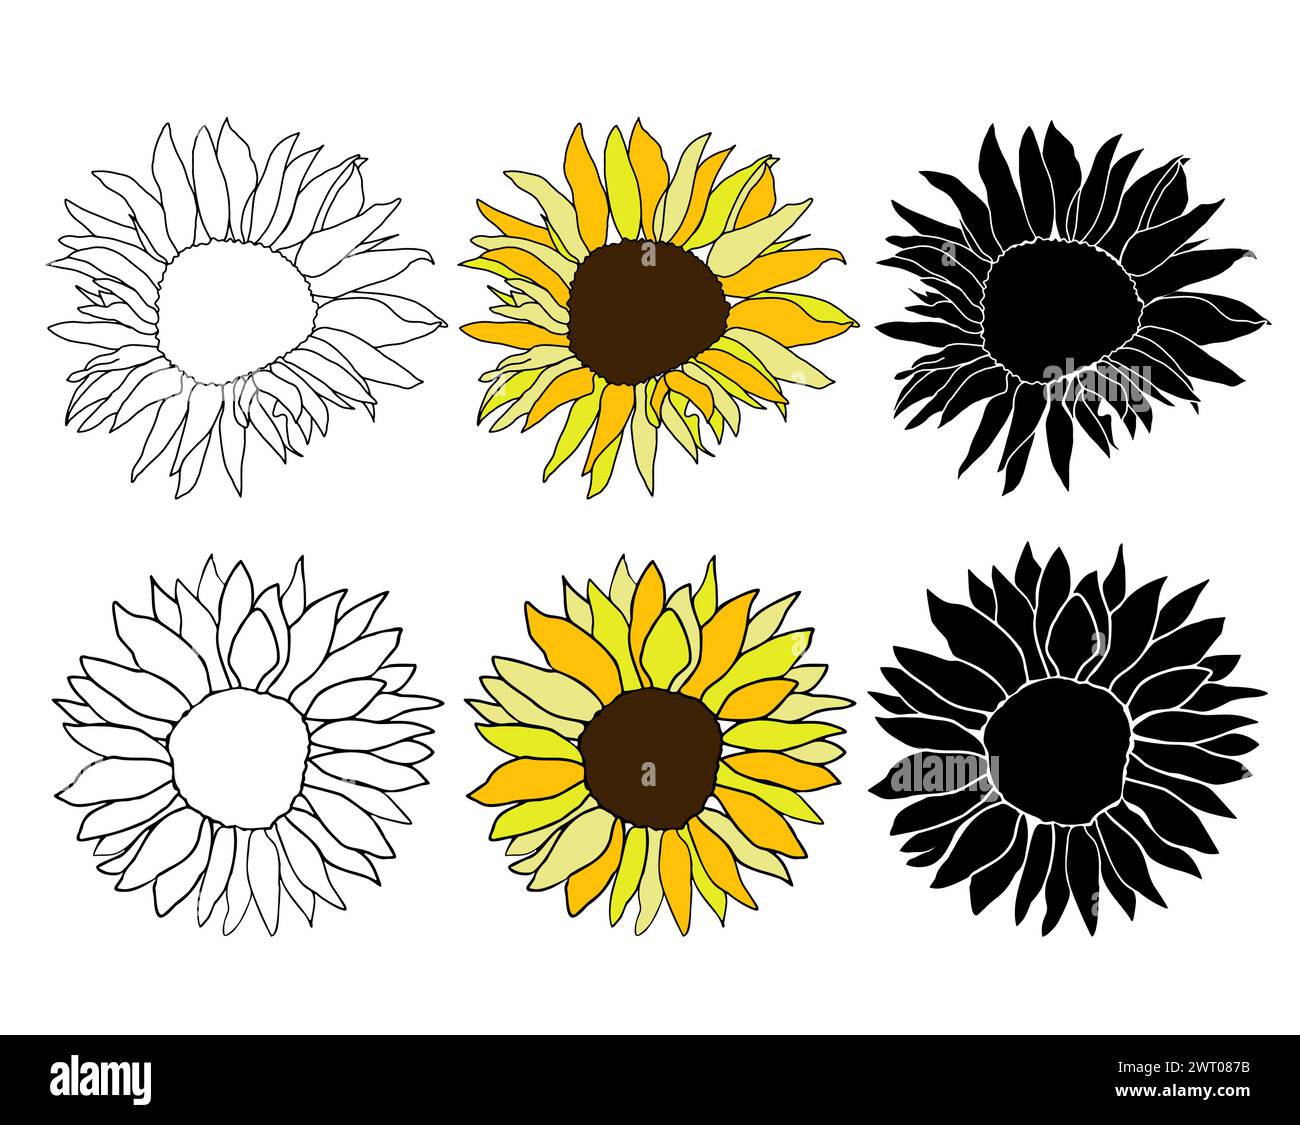 Sunflower head hand drawn elements set for design. Silhouette, line art black ink and colorful flower. Vector clip art for logo, coloring page, isolat Stock Vector